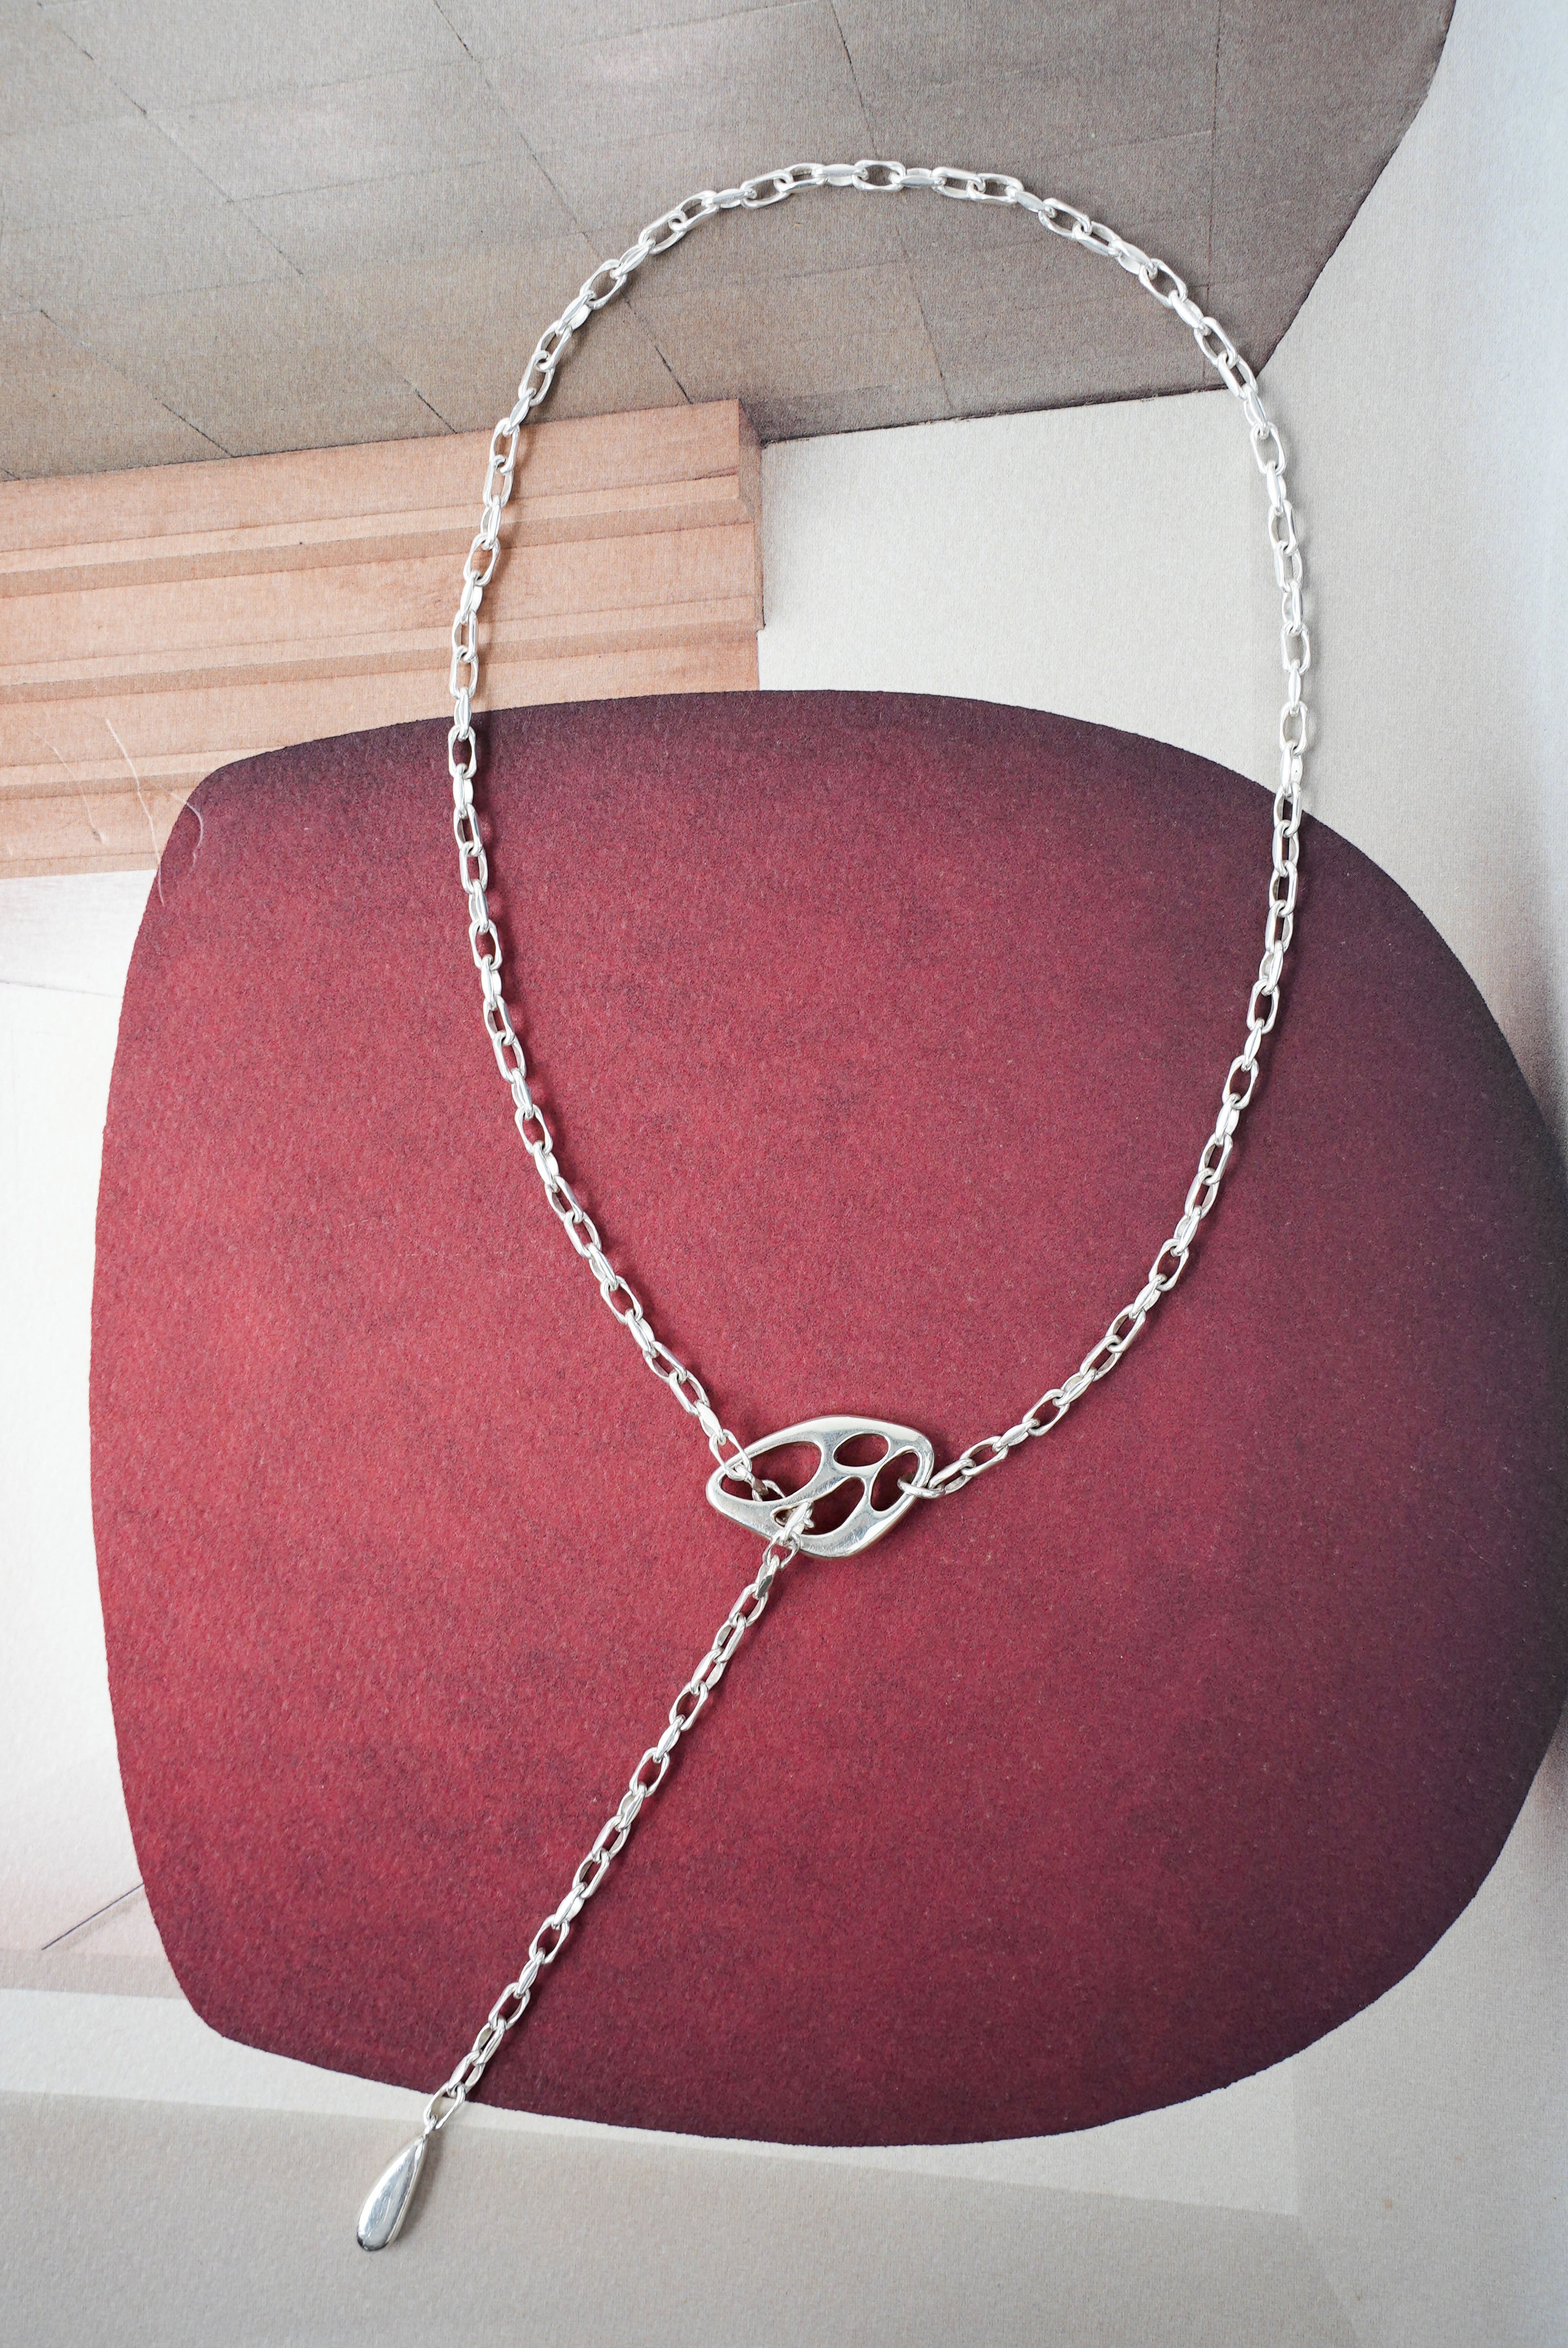 STRONG LOTUS SILVER NECKLACE OUR´s ネックレス-